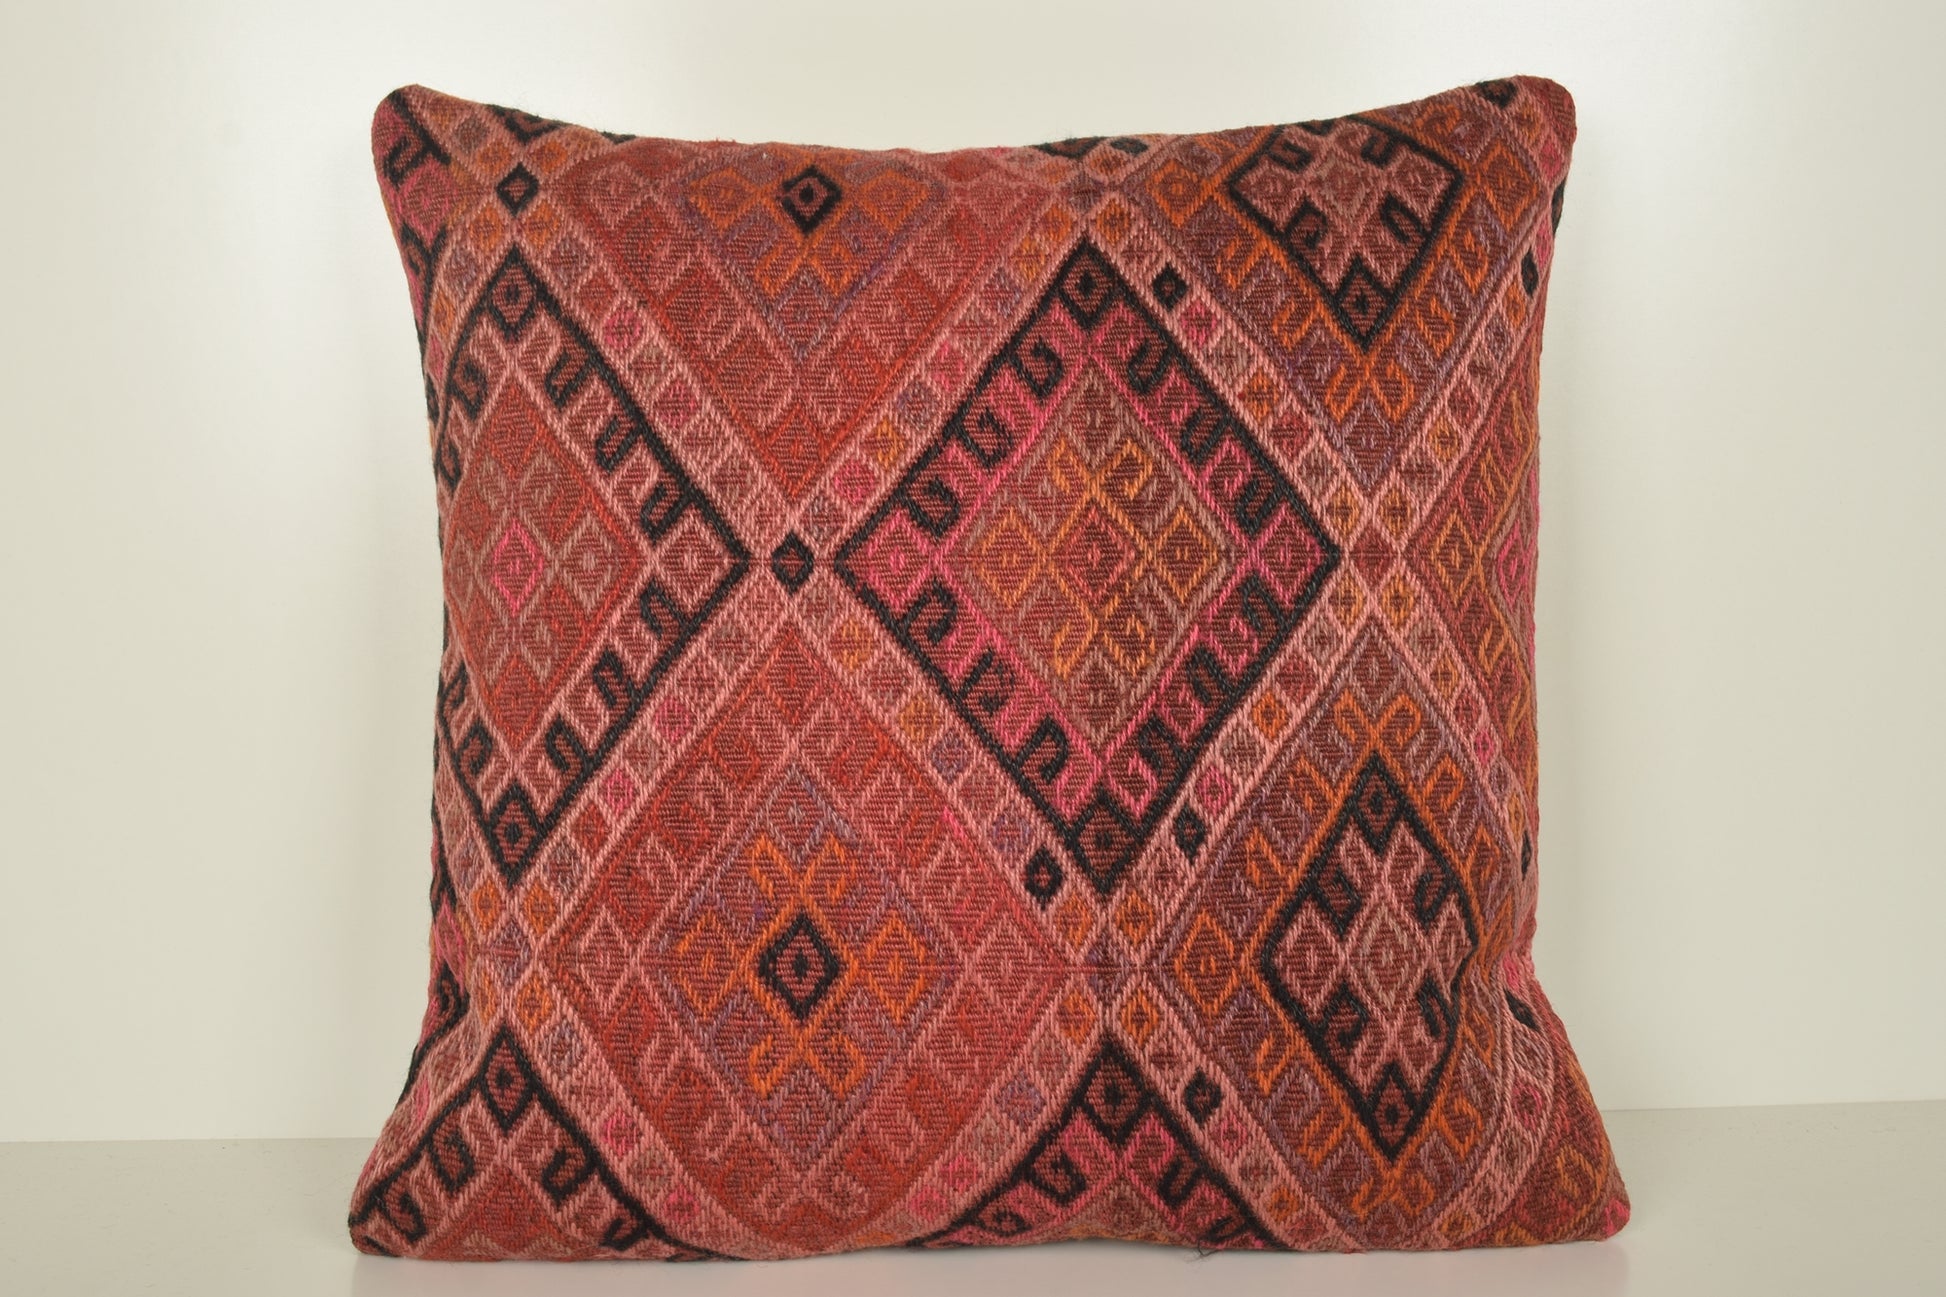 Kilim Patterned Pillow A00825 Crochet pillowcase Outdoor throw pillow cover 24x24